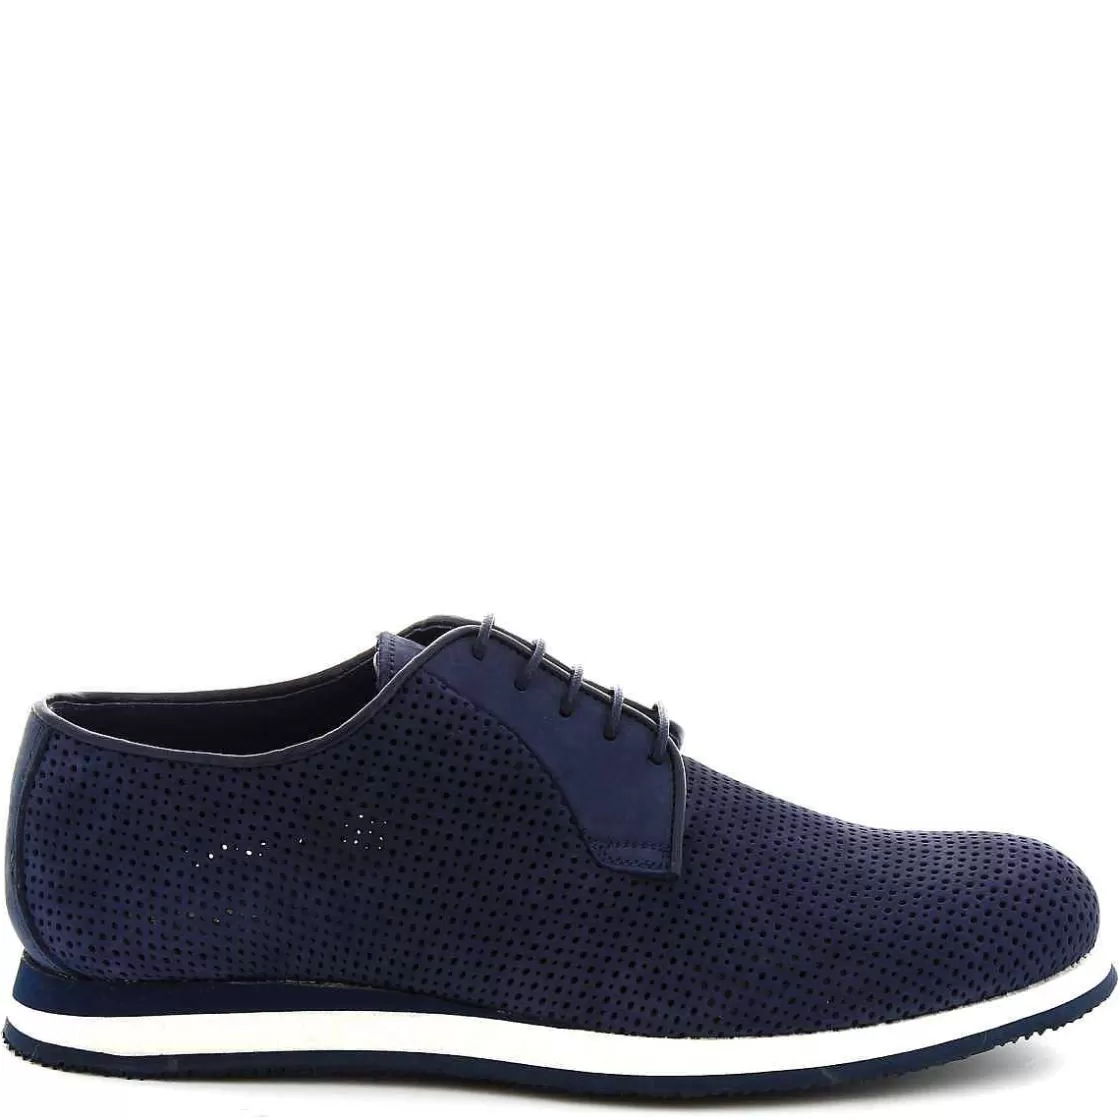 Leonardo Handmade Men'S Casual Shoes In Perforated Blue Suede And Calf Leather Online